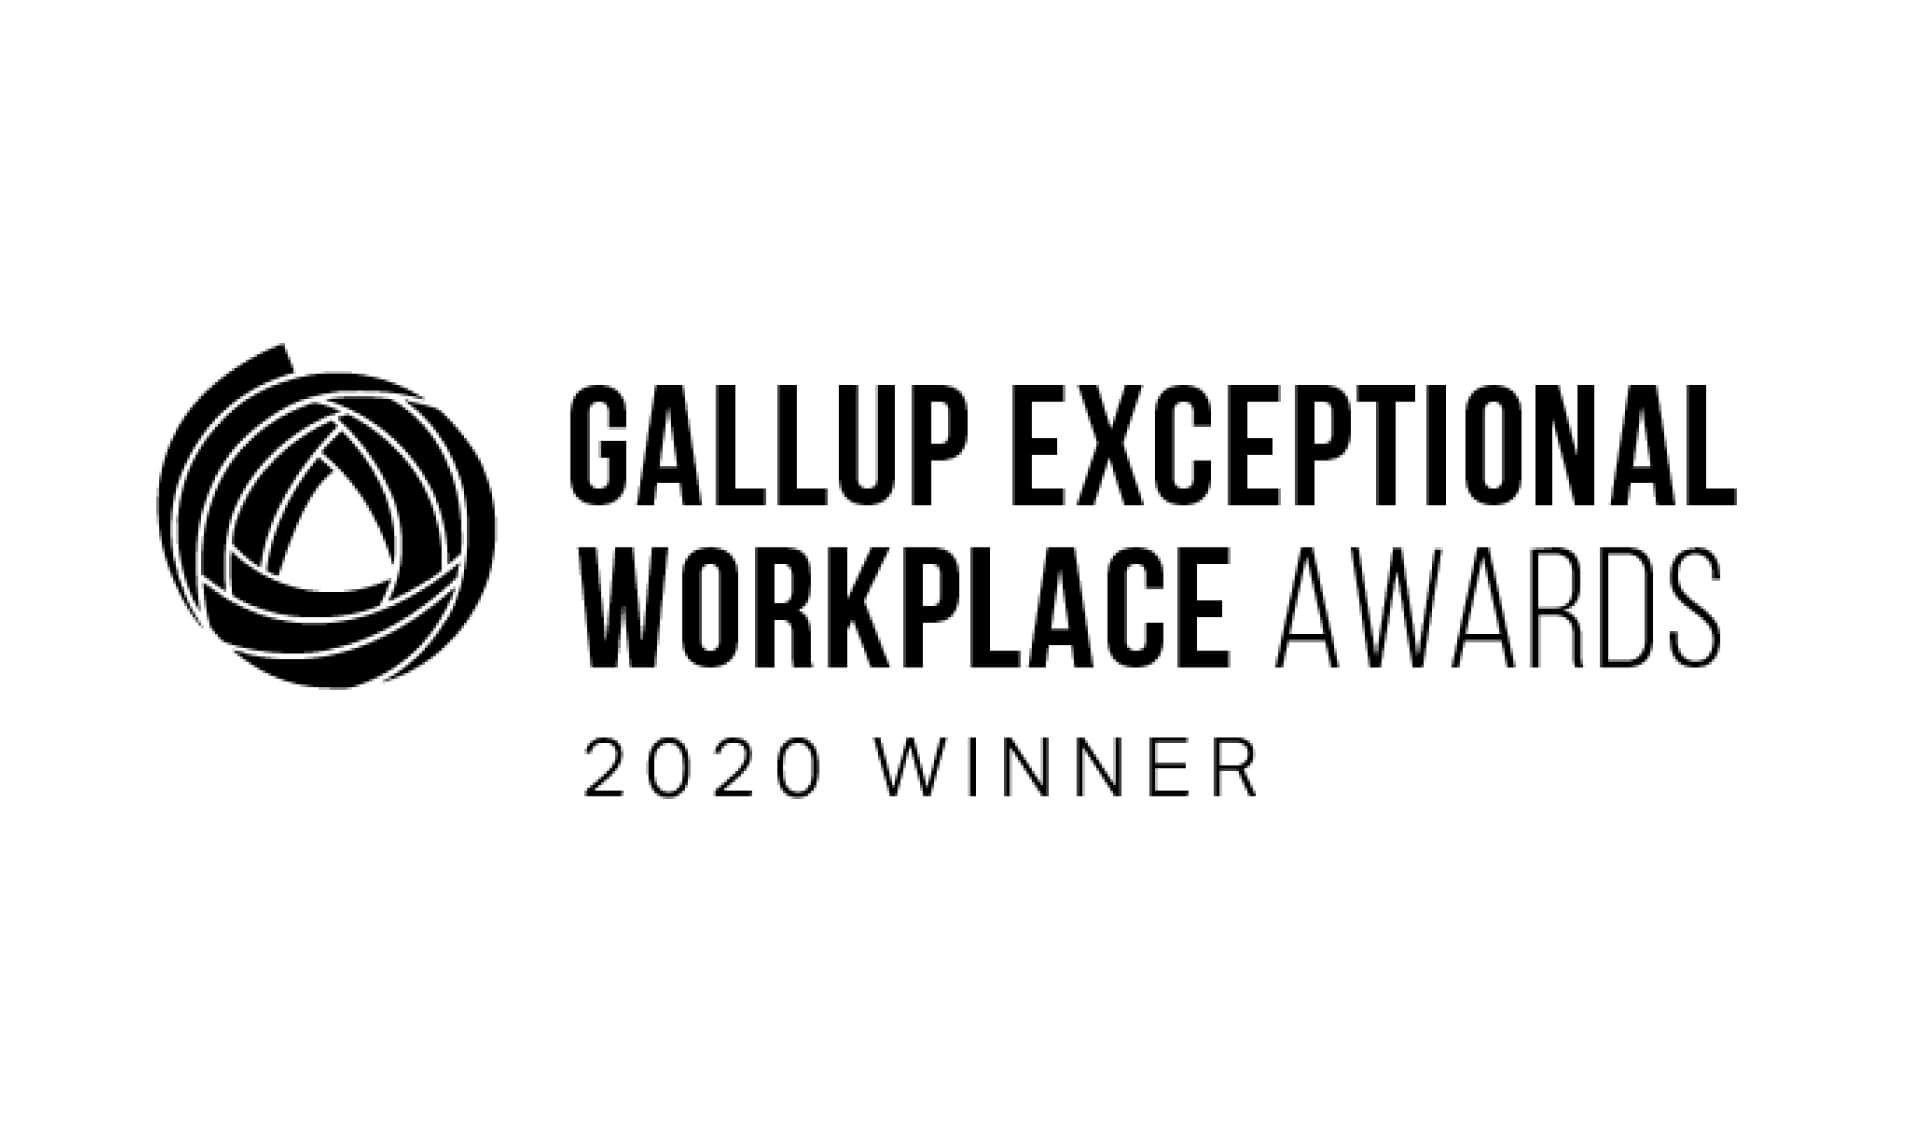 TCI Receives Gallup Exceptional Workplace Award - TCI Wealth